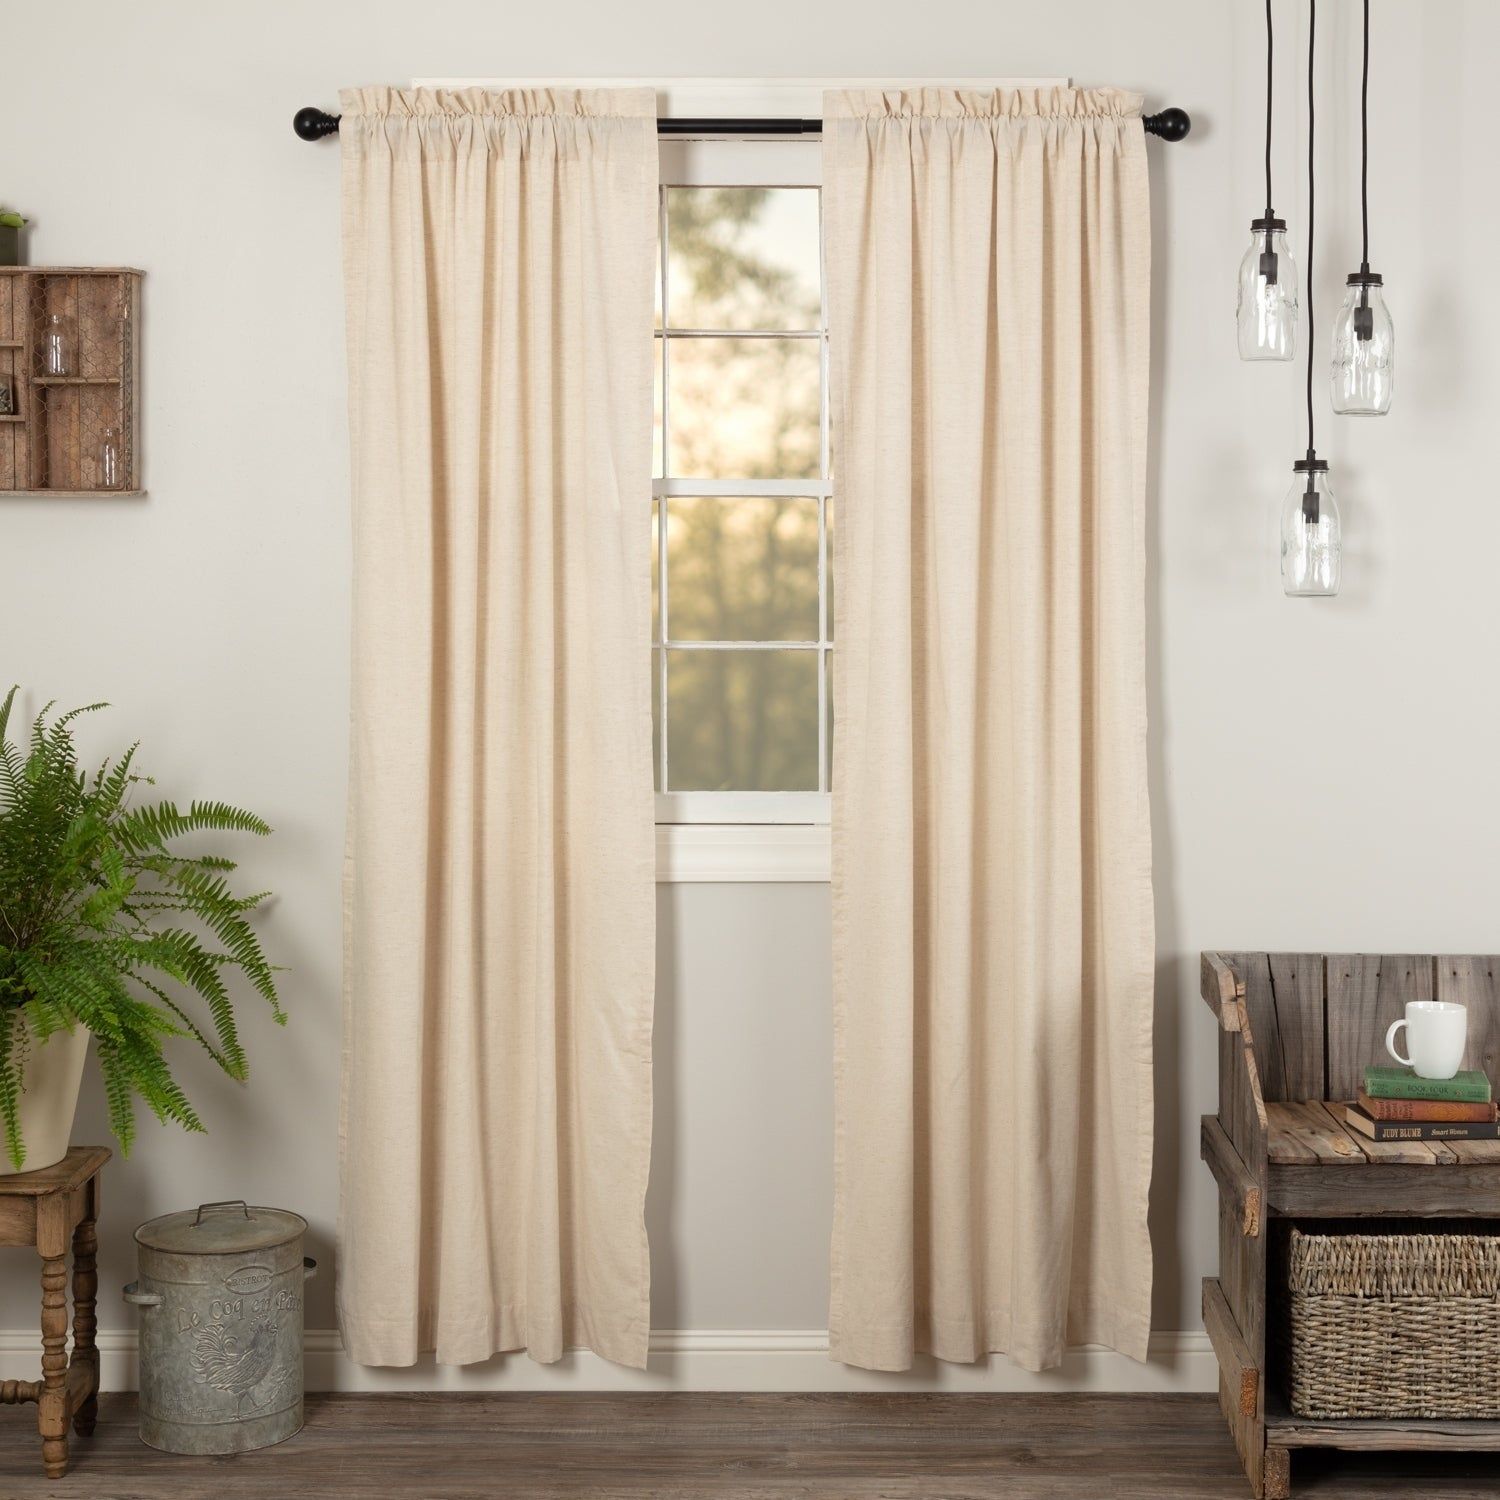 Details About Farmhouse Curtains Vhc Simple Life Flax Panel Pair Rod Throughout Rod Pocket Cotton Linen Blend Solid Color Flax Kitchen Curtains (View 13 of 20)